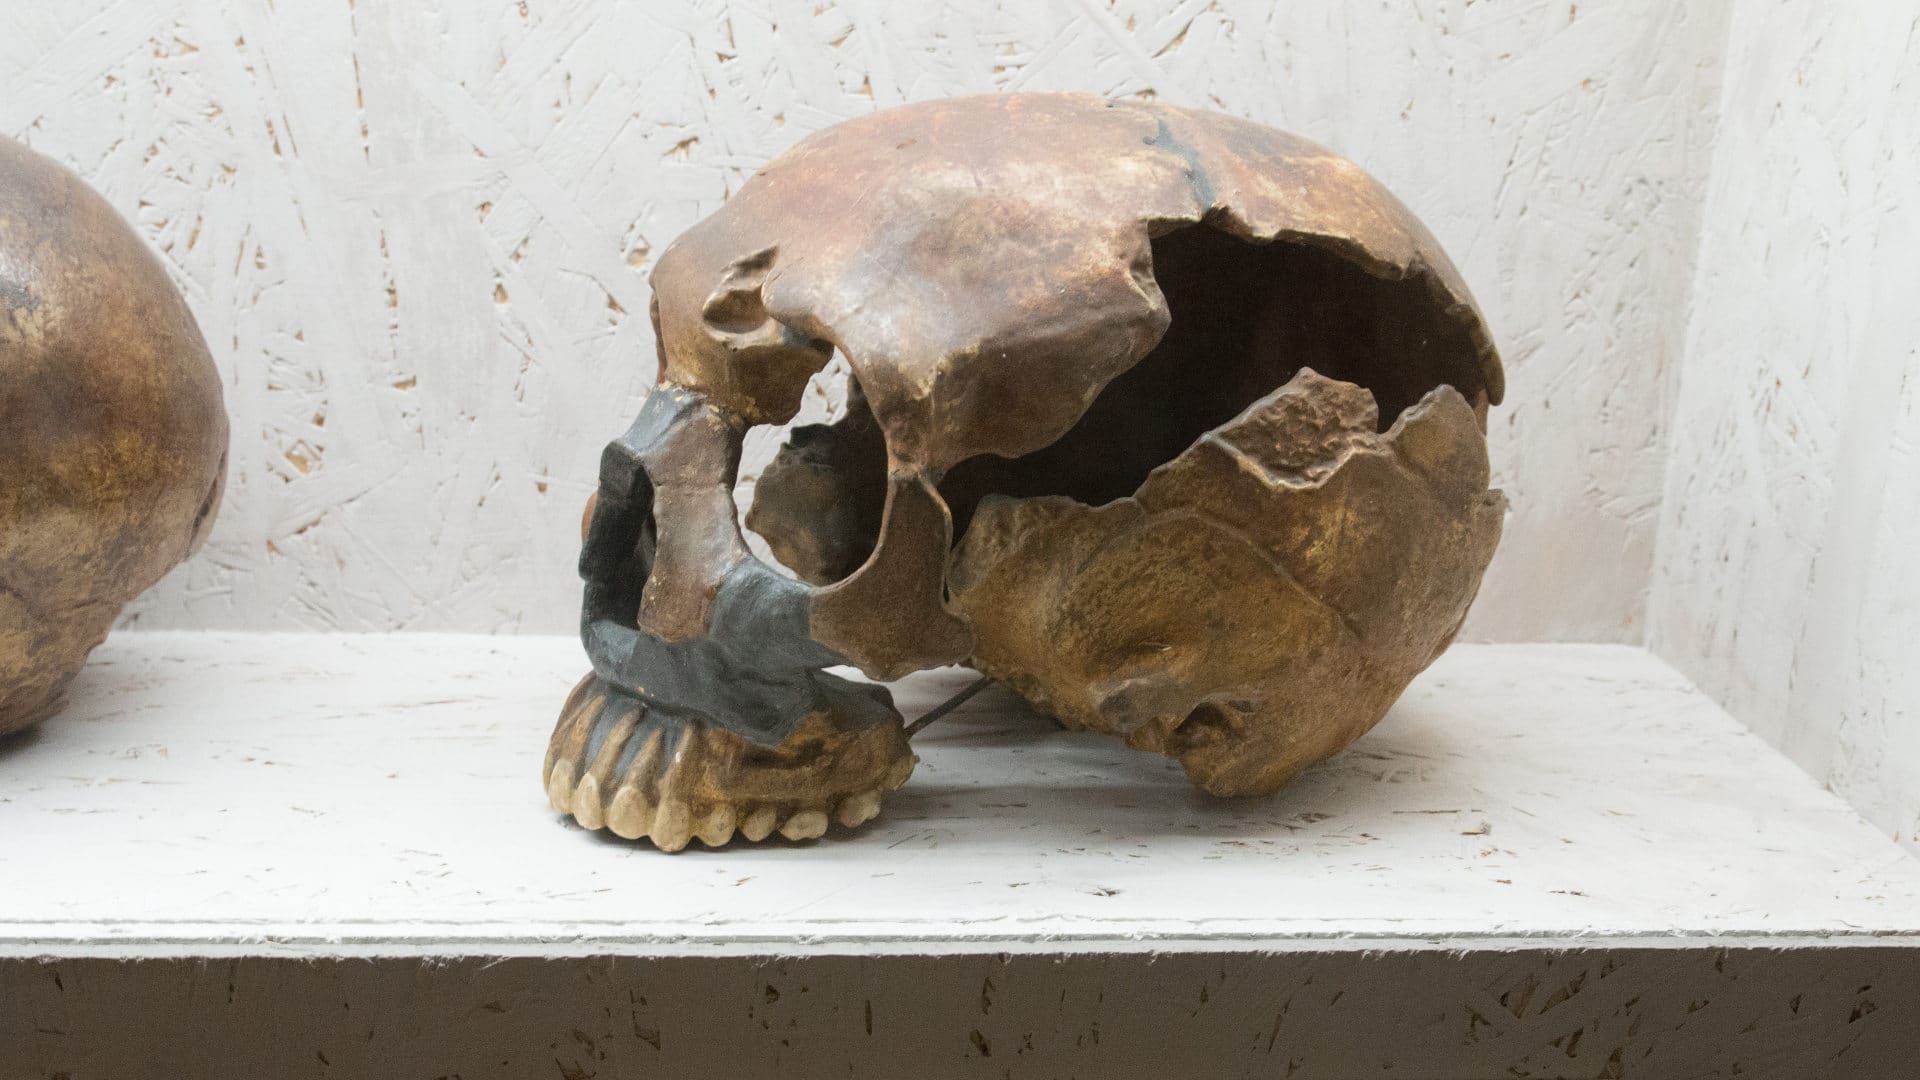 Replica of a fossilized neanderthal skull from Le Moustier, an archaeological site in France.